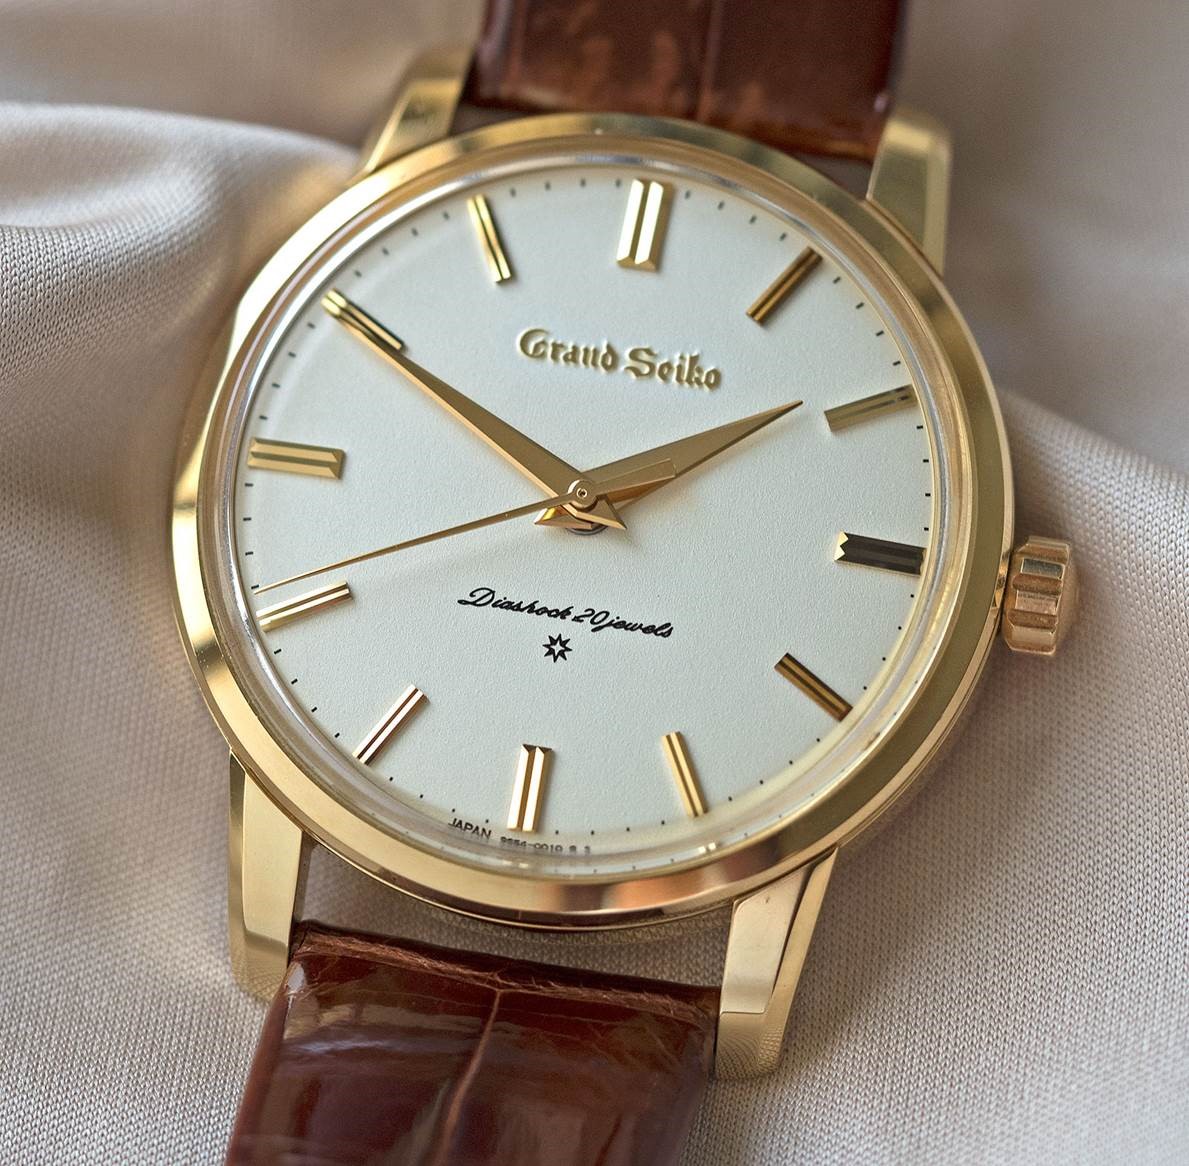 Grand Seiko and Credor, the two faces of the same coin. - Ikigai Watches